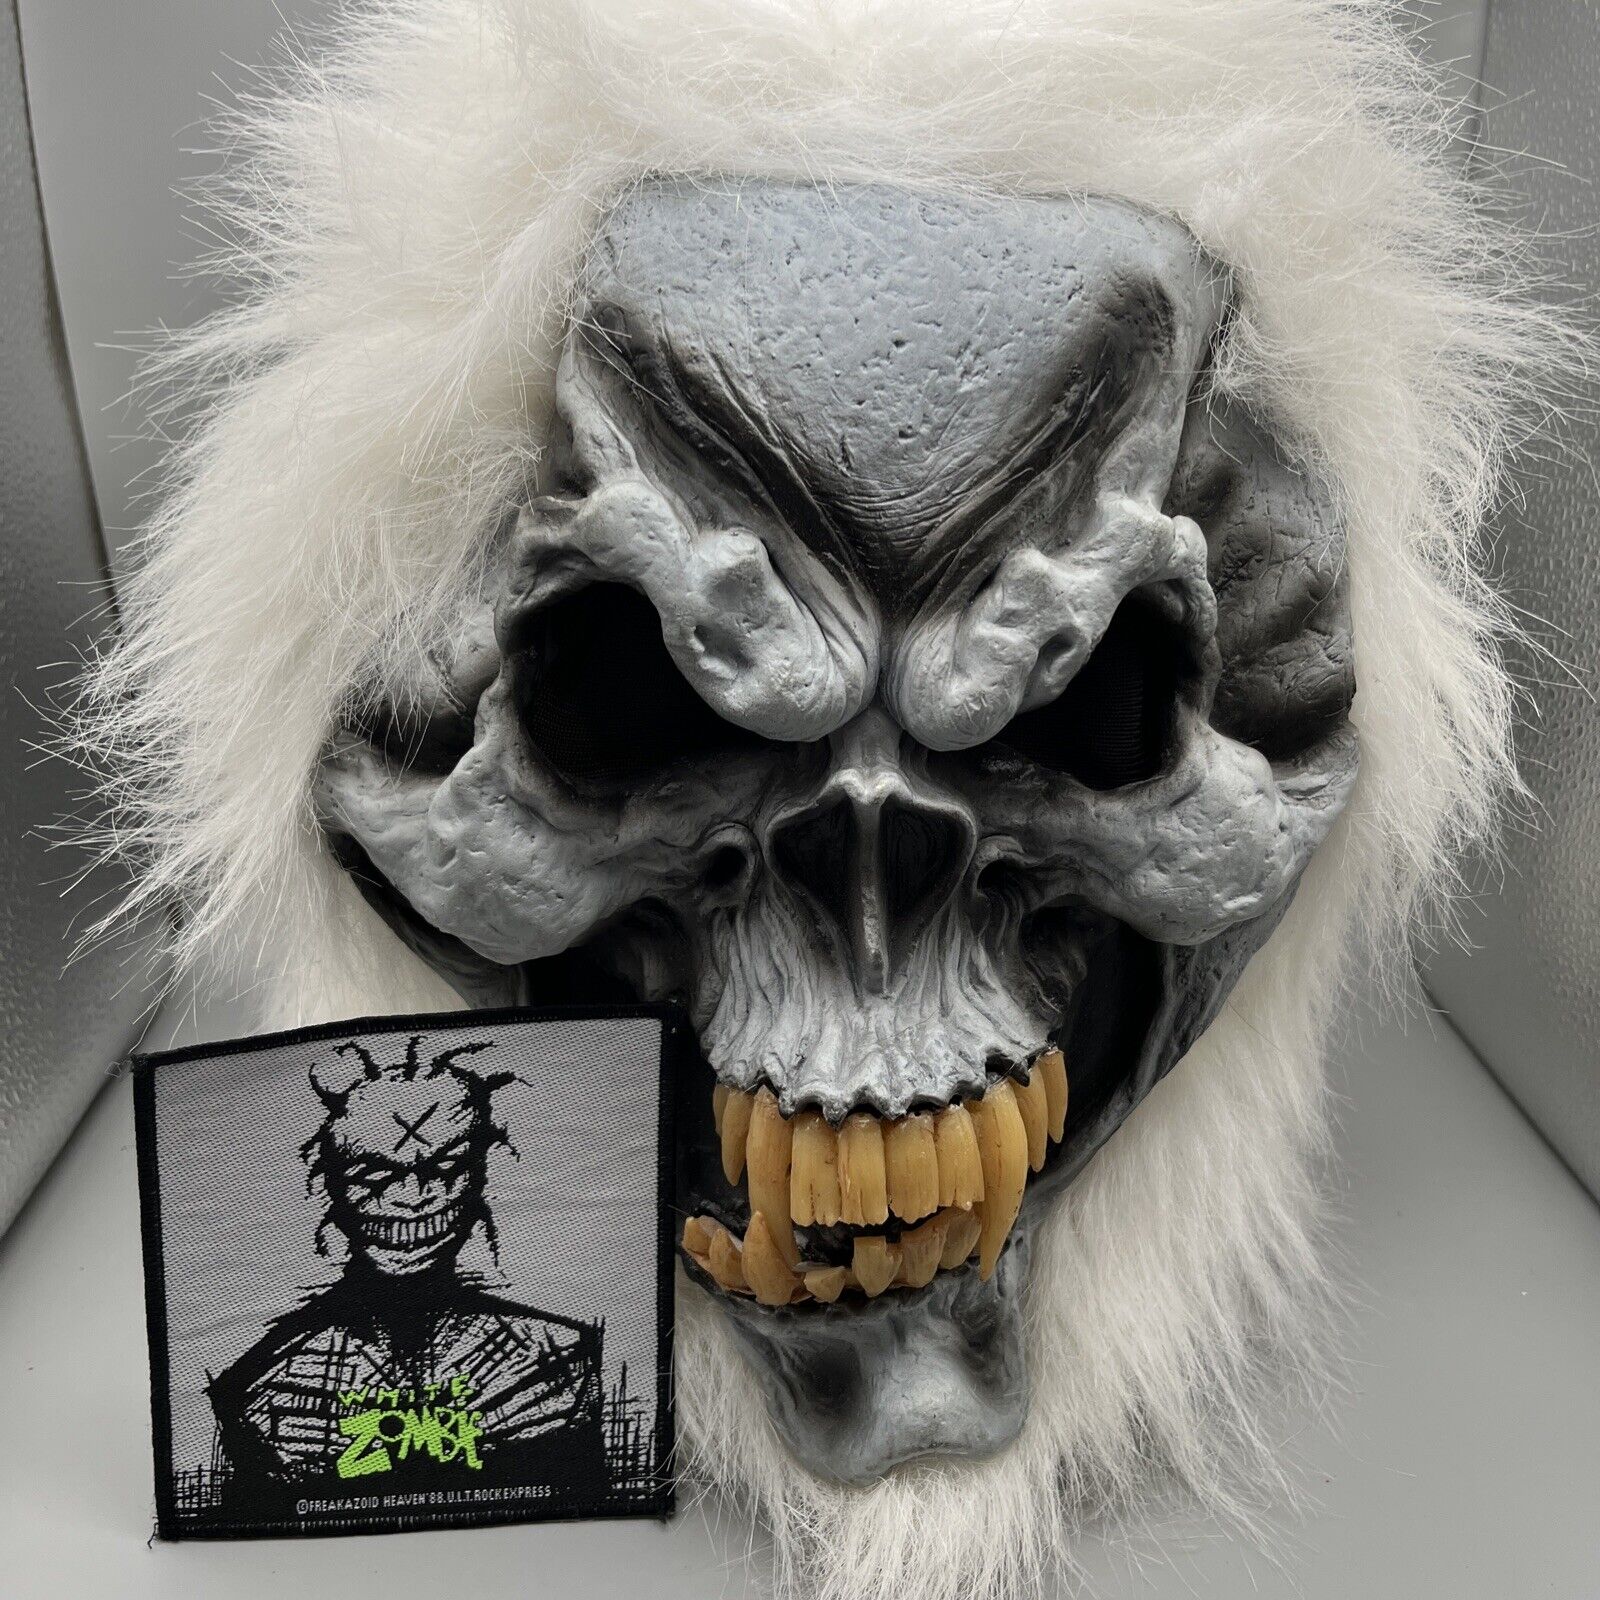 Scary Ice Vampire Zombie Mask fangs Fur Halloween Costume w Patch